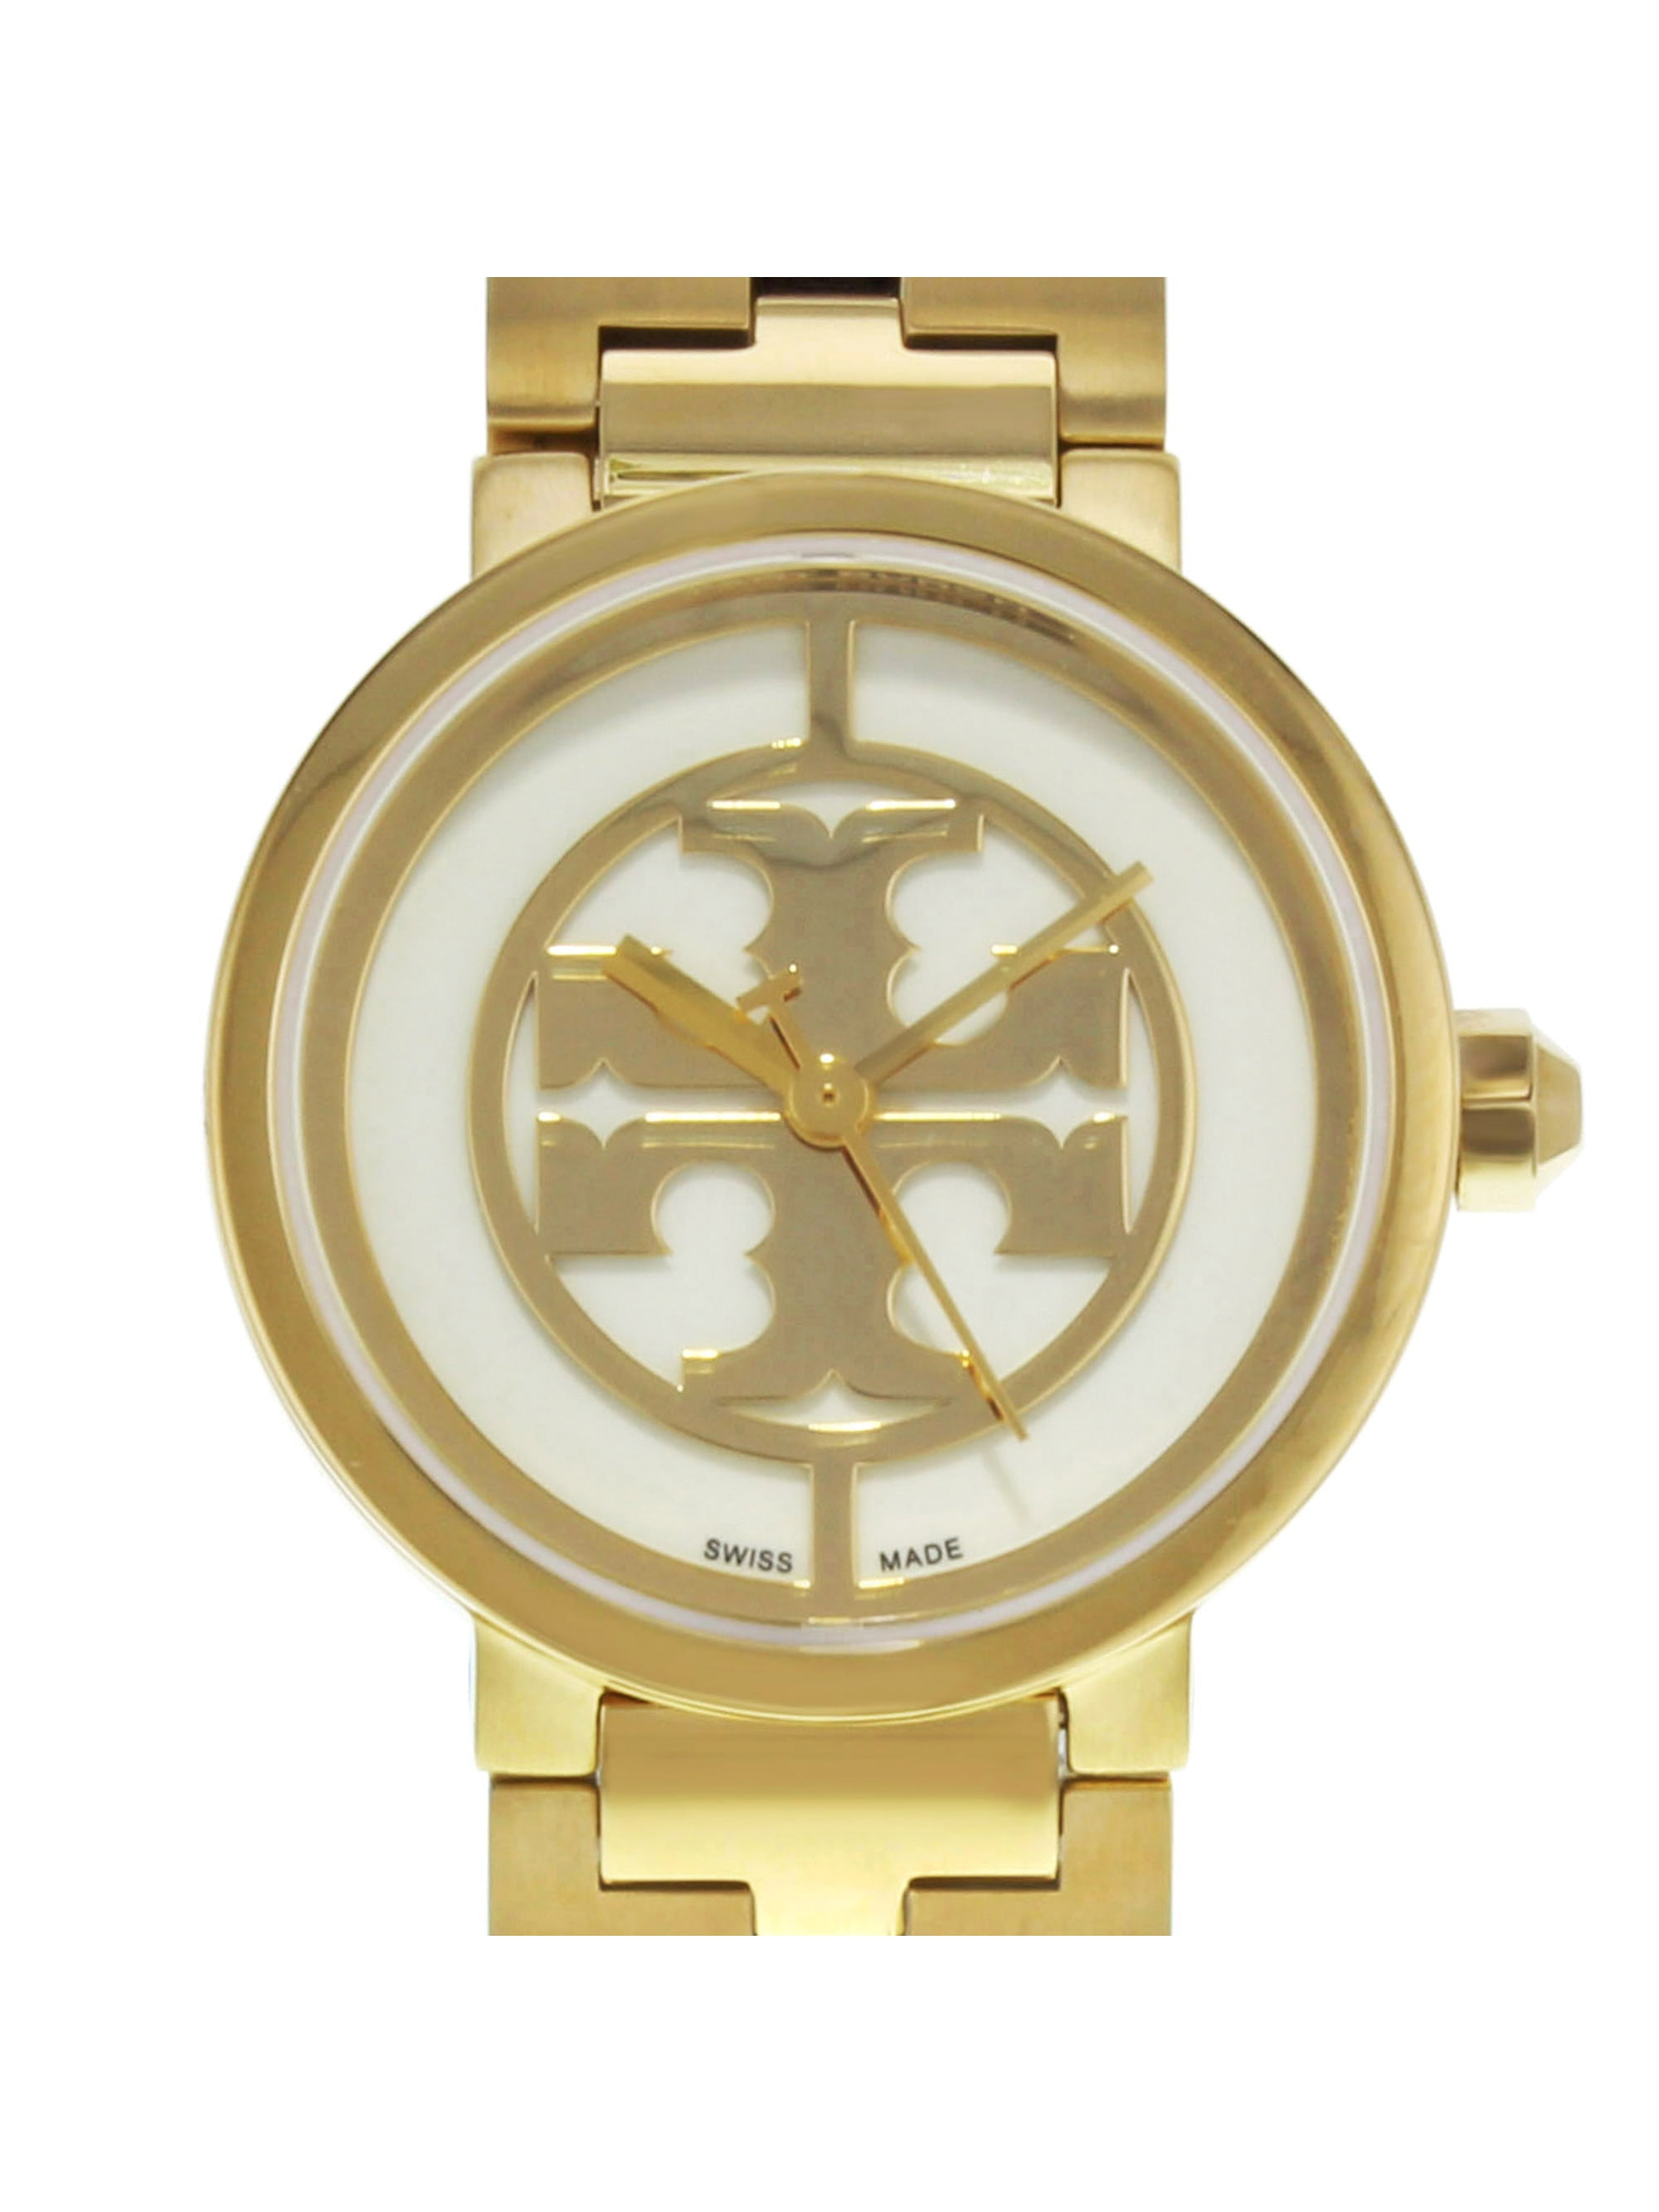 Tory Burch The Reva Stainless Steel Women's Watch at FORZIERI